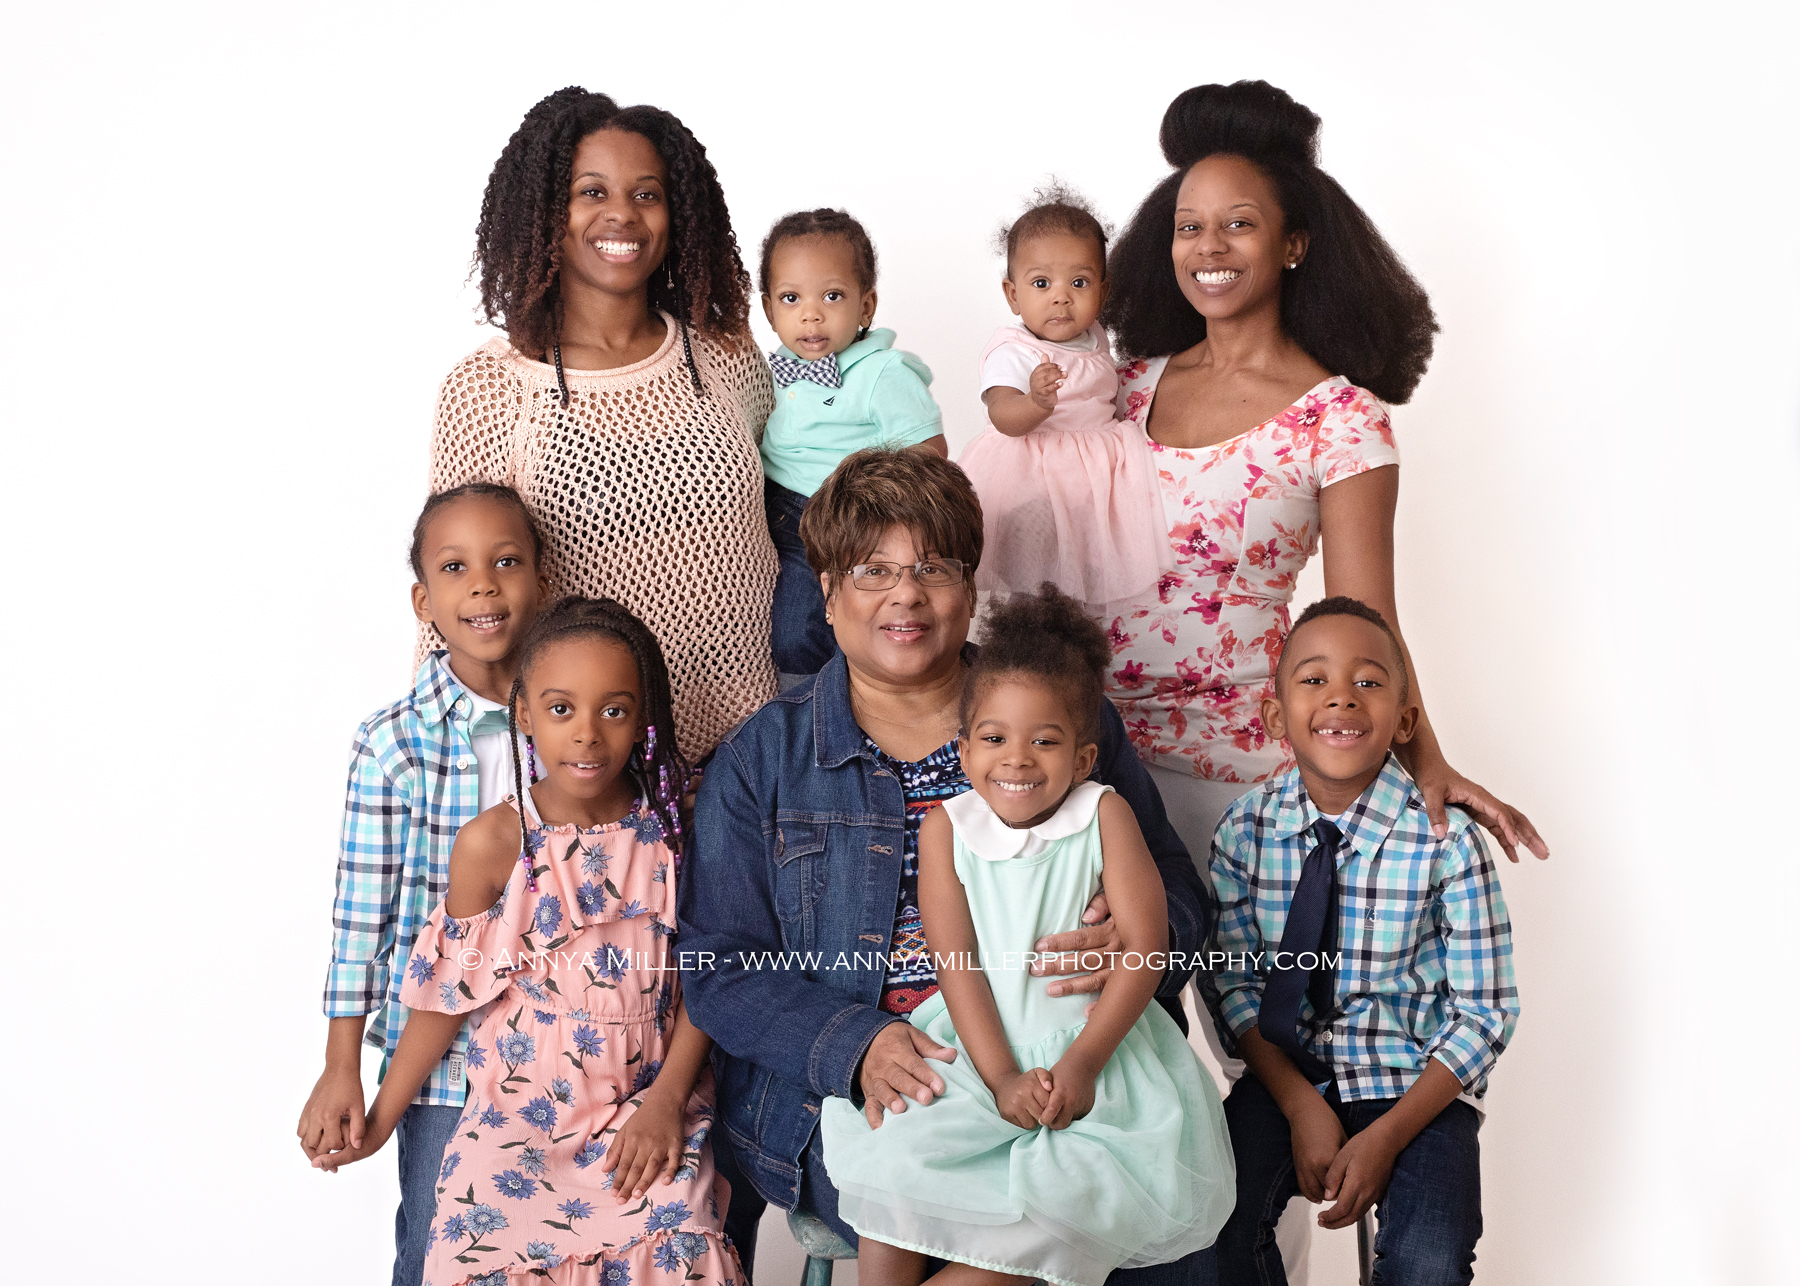 Durham Region family photographer Annya Miller creates beautiful portraits for families in Durham and the GTA